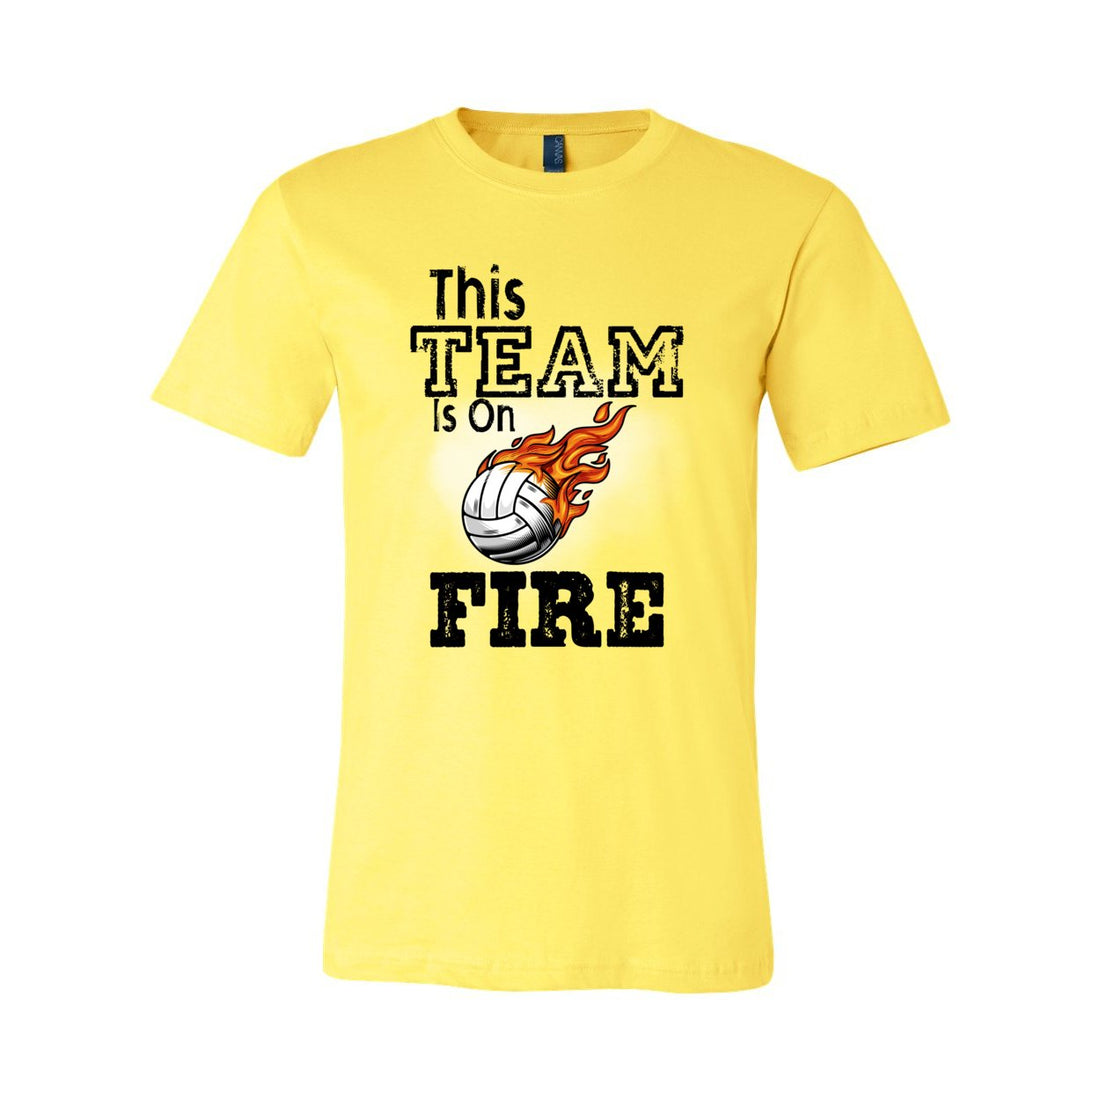 This Team Is On Fire - T-Shirts - Positively Sassy - This Team Is On Fire